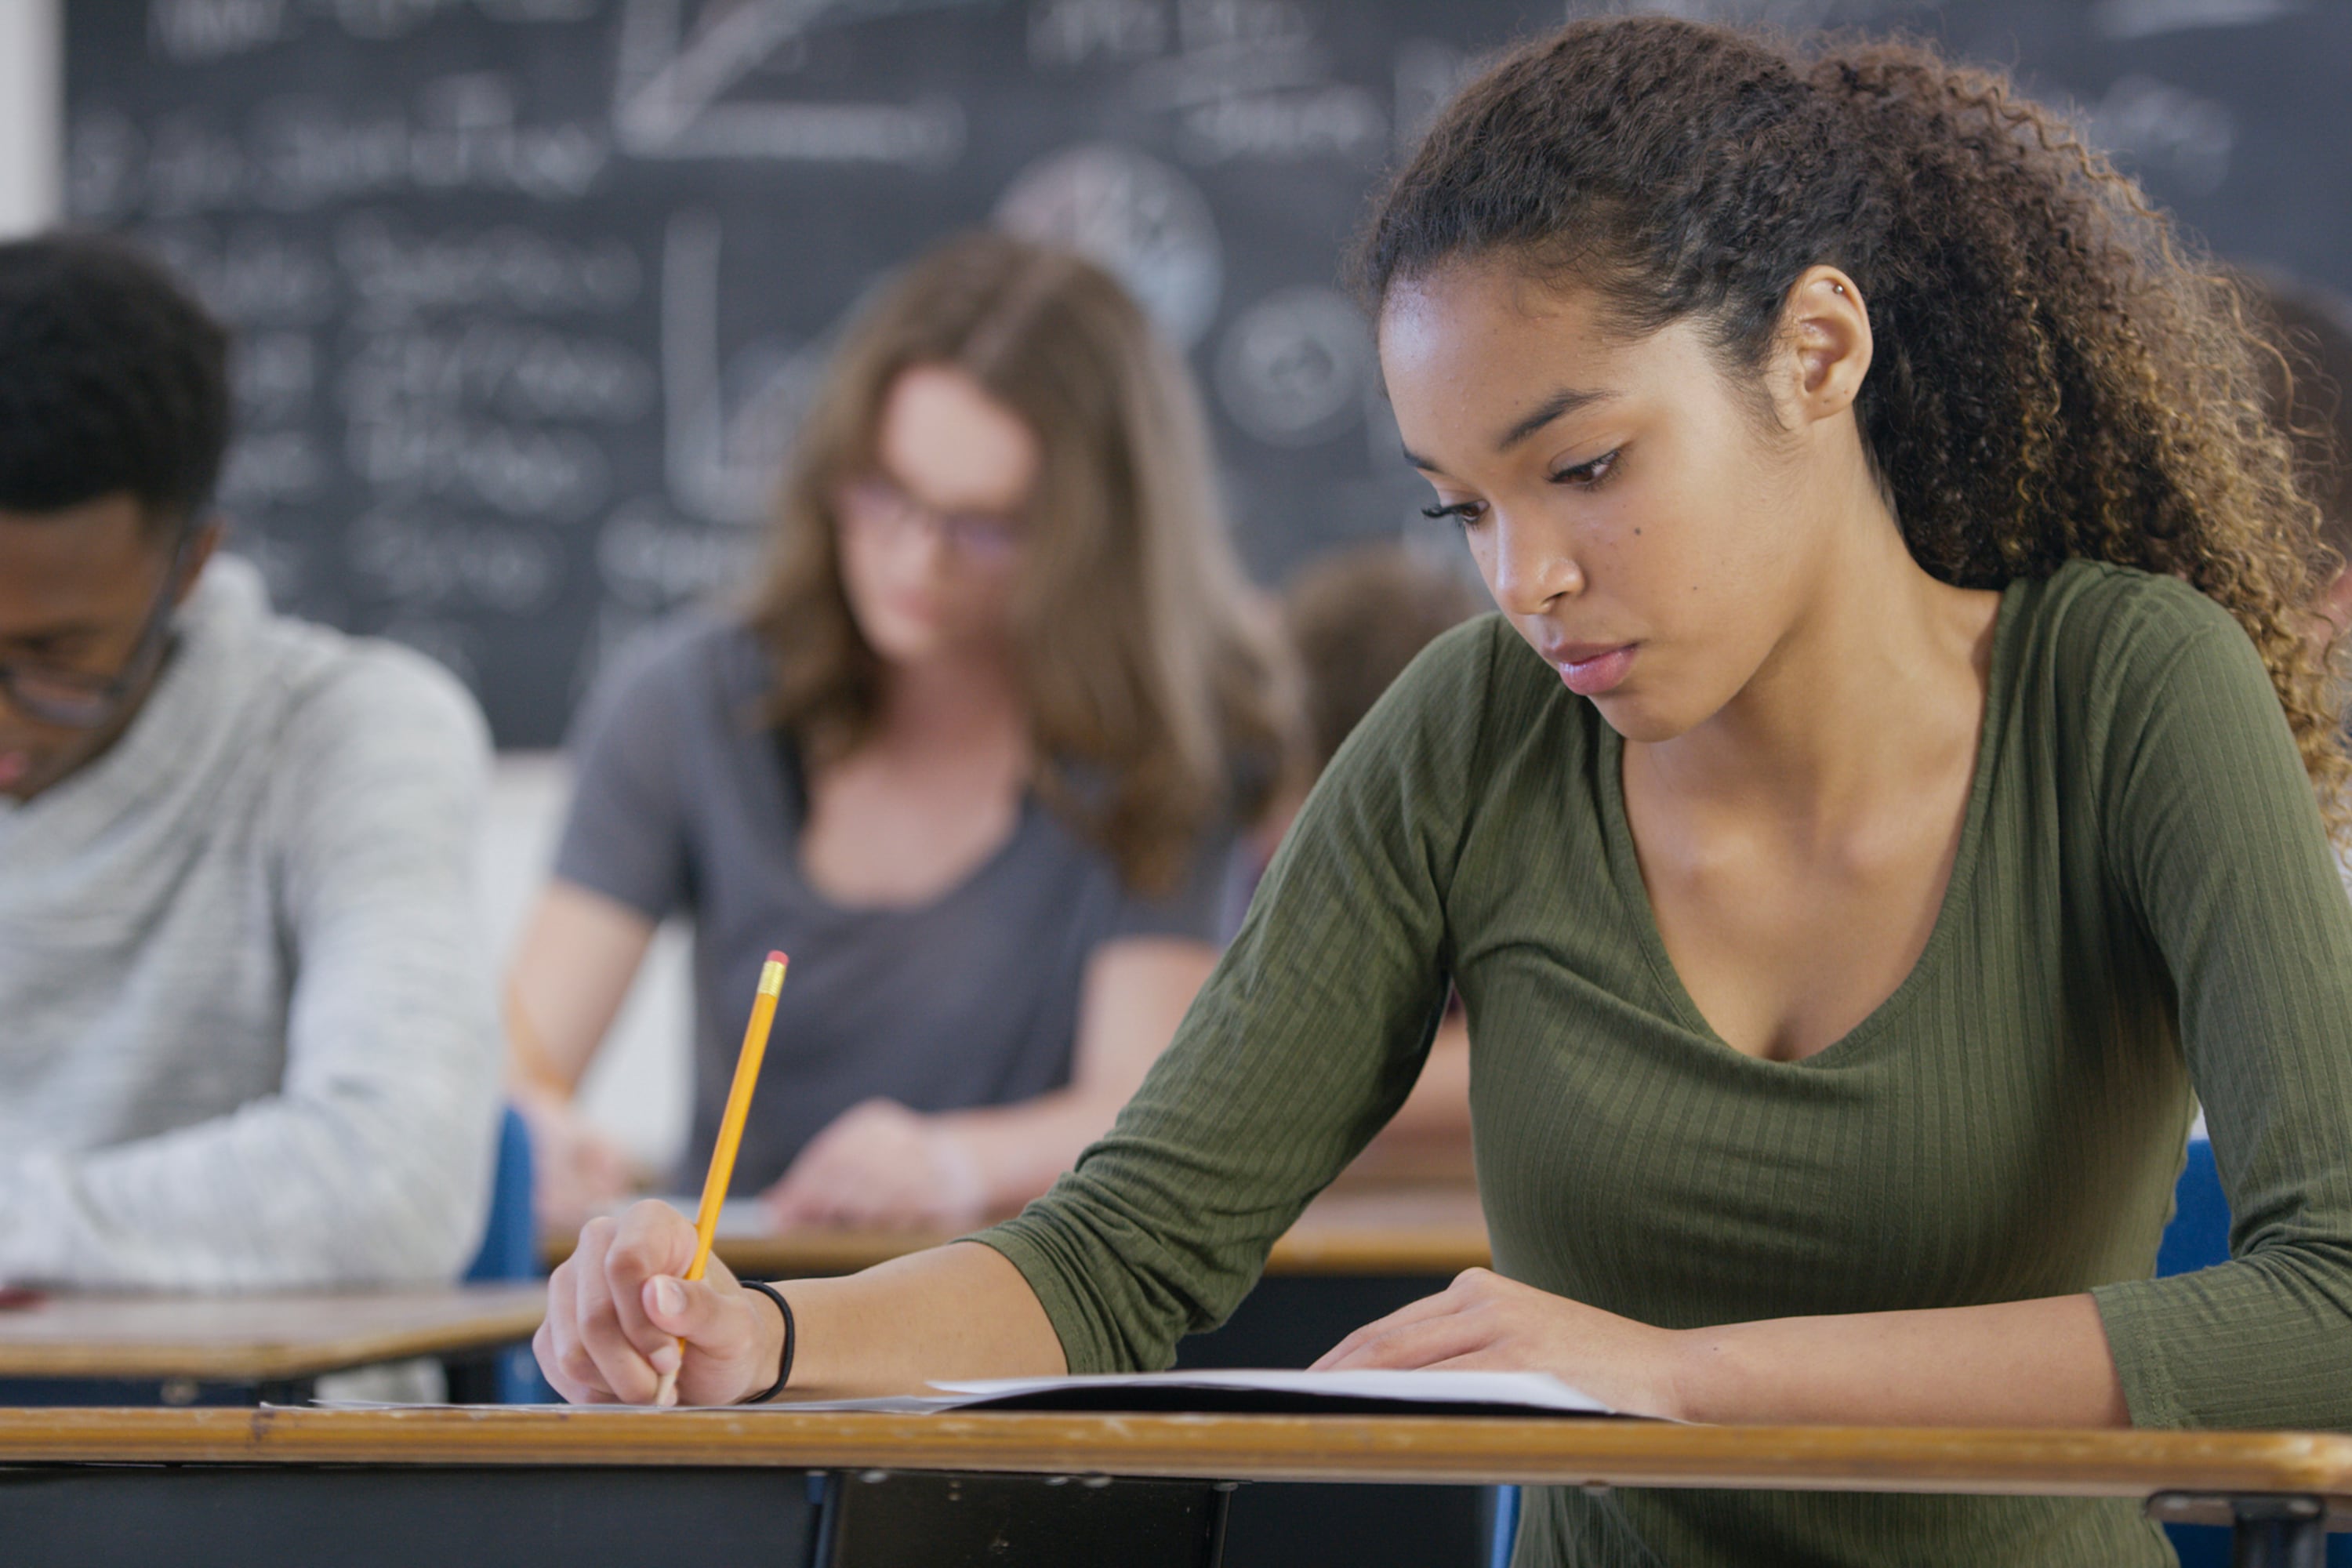 A high school girl wearing a green shirt sits at a desk taking a test with two students in the background.